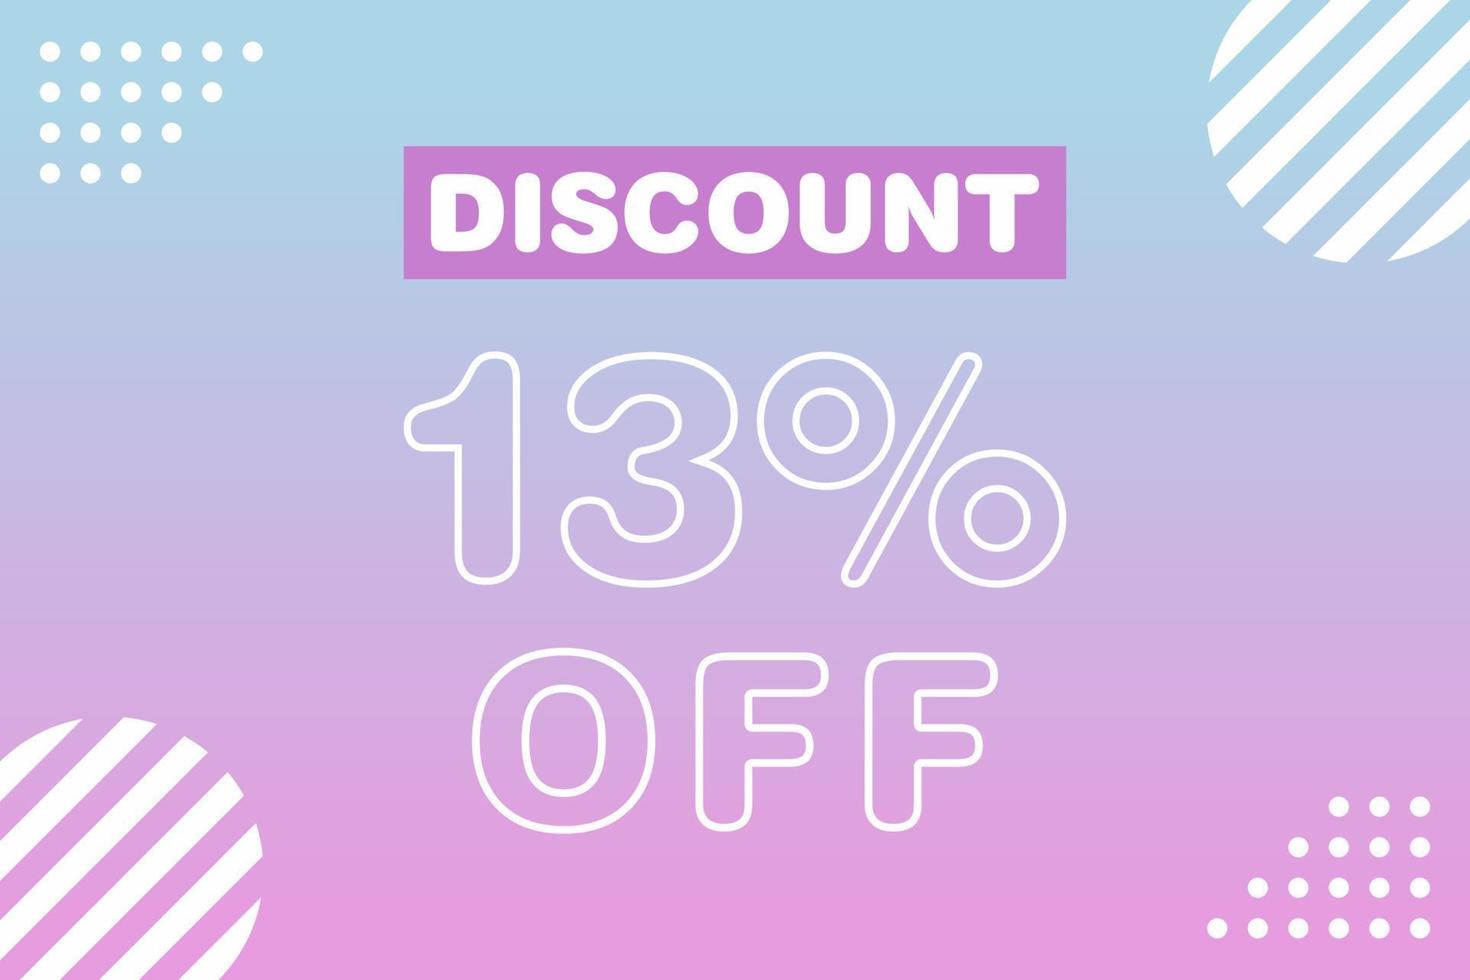 13 percent Sale and discount labels. price off tag icon flat design. vector